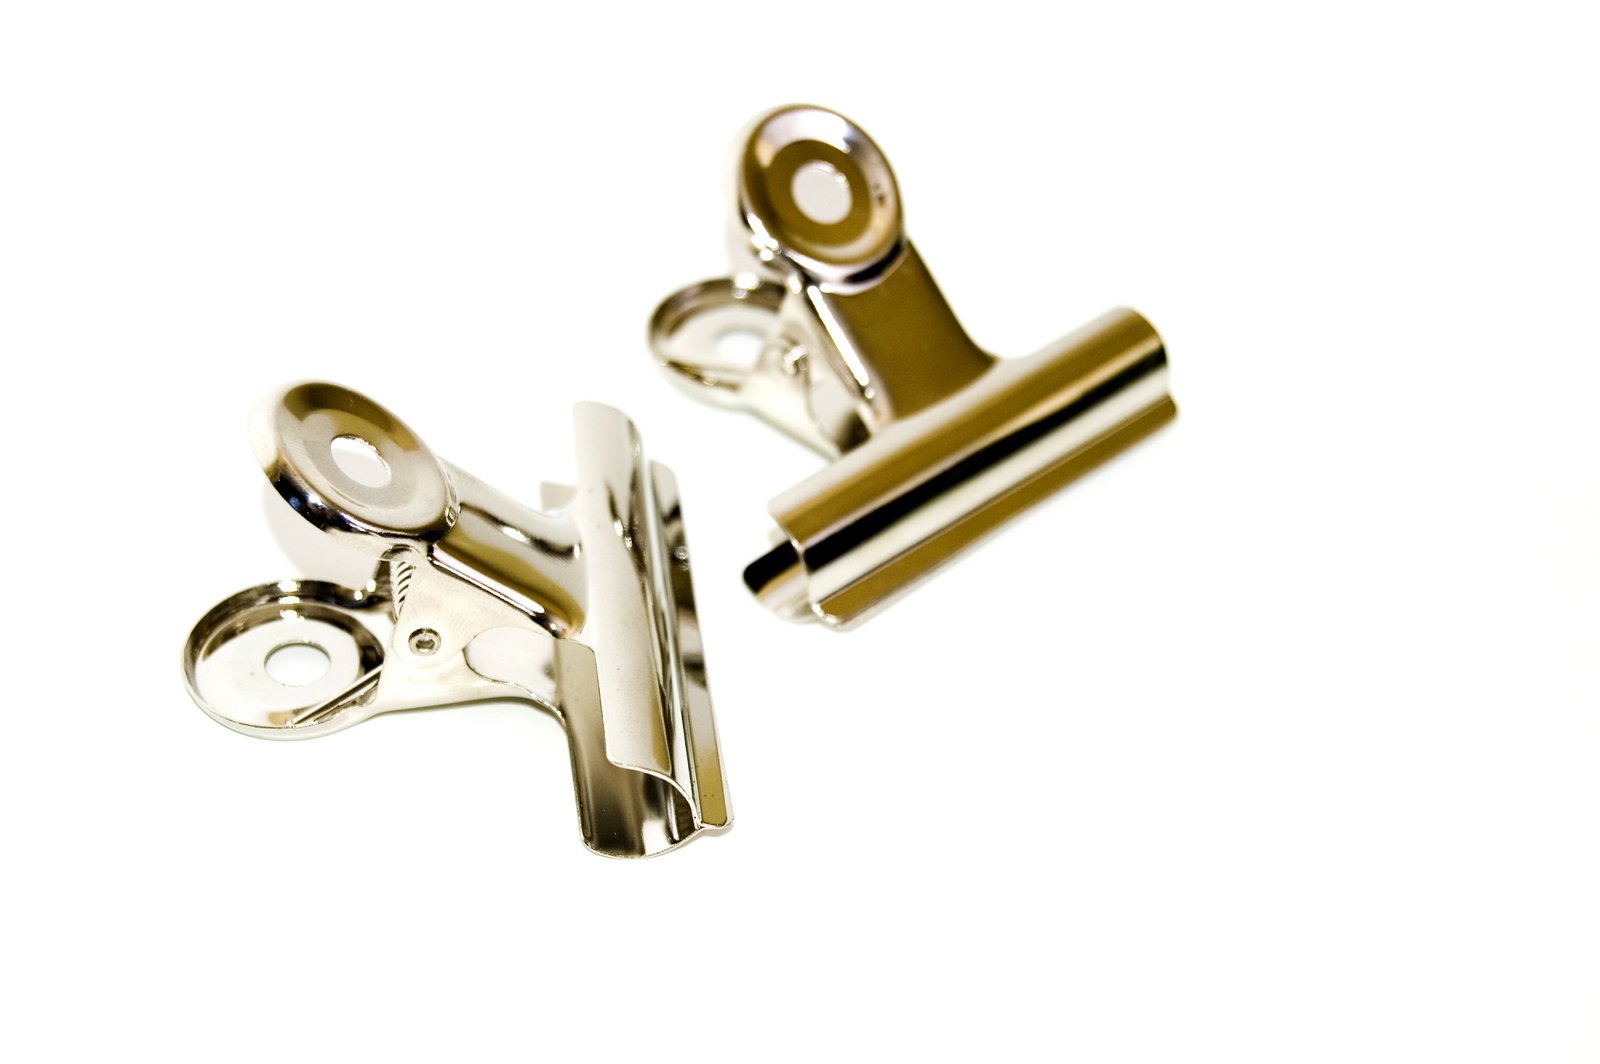 pair of metal clippers in motion against a white background